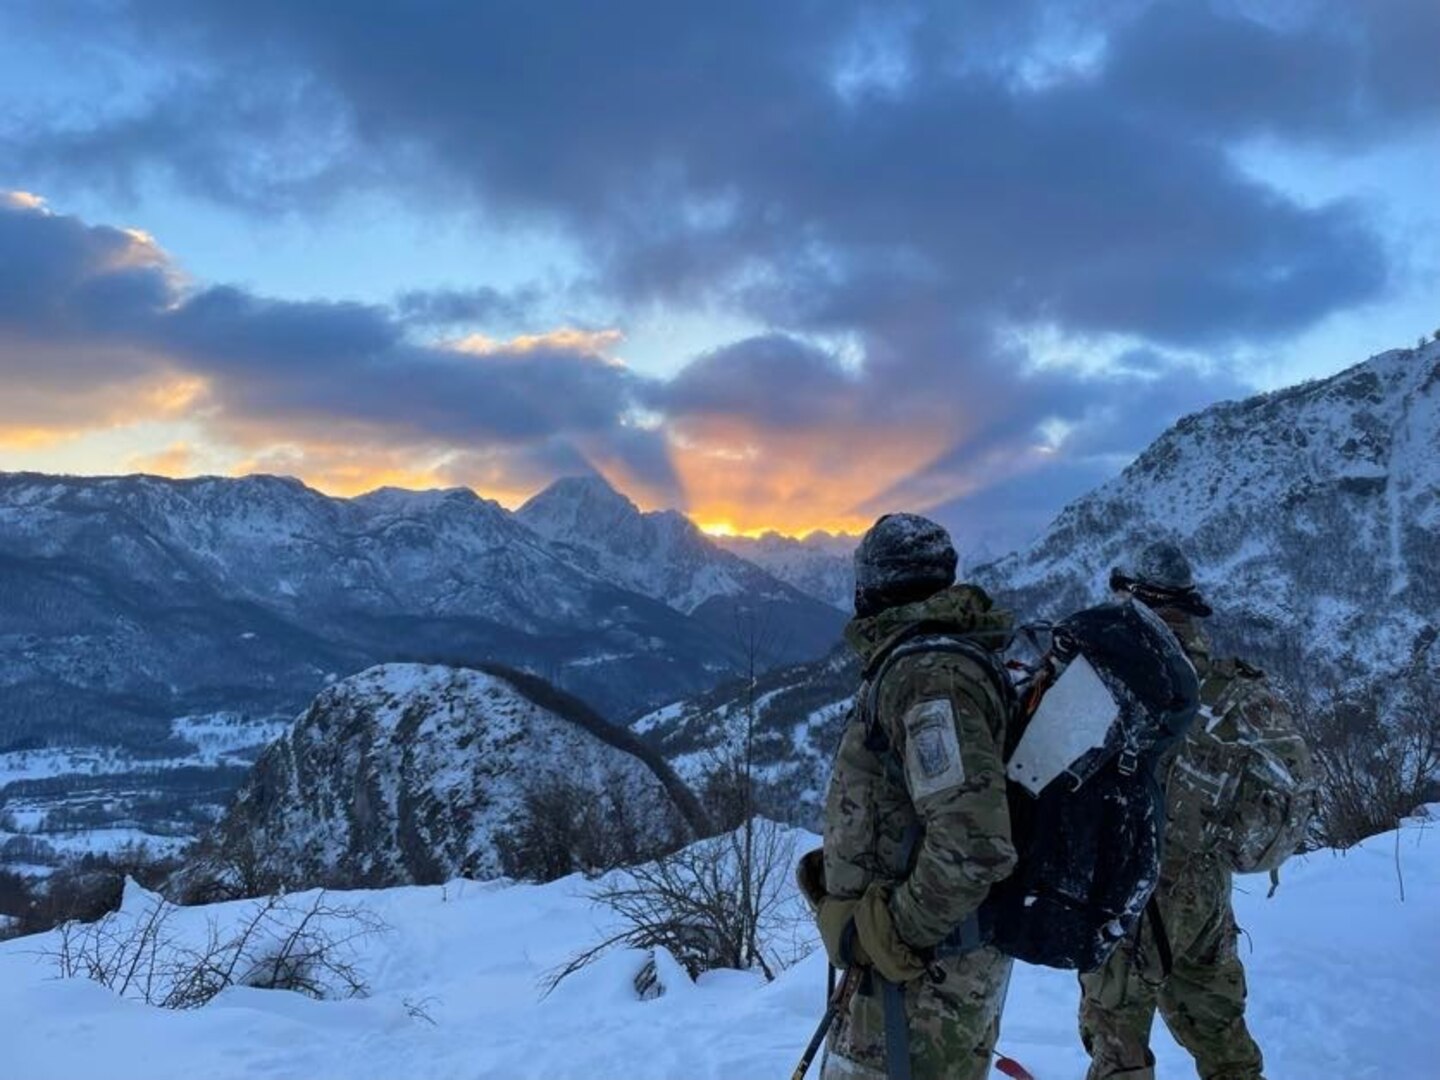 U.S. Army Soldiers from 3rd Battalion, 172nd Infantry Regiment (Mountain), 86th Infantry Brigade Combat Team (Mountain), watch the sun set over the mountains around Kolašin, Montenegro, on their descent from the summit during Common Challenge 23, Feb. 7, 2023.